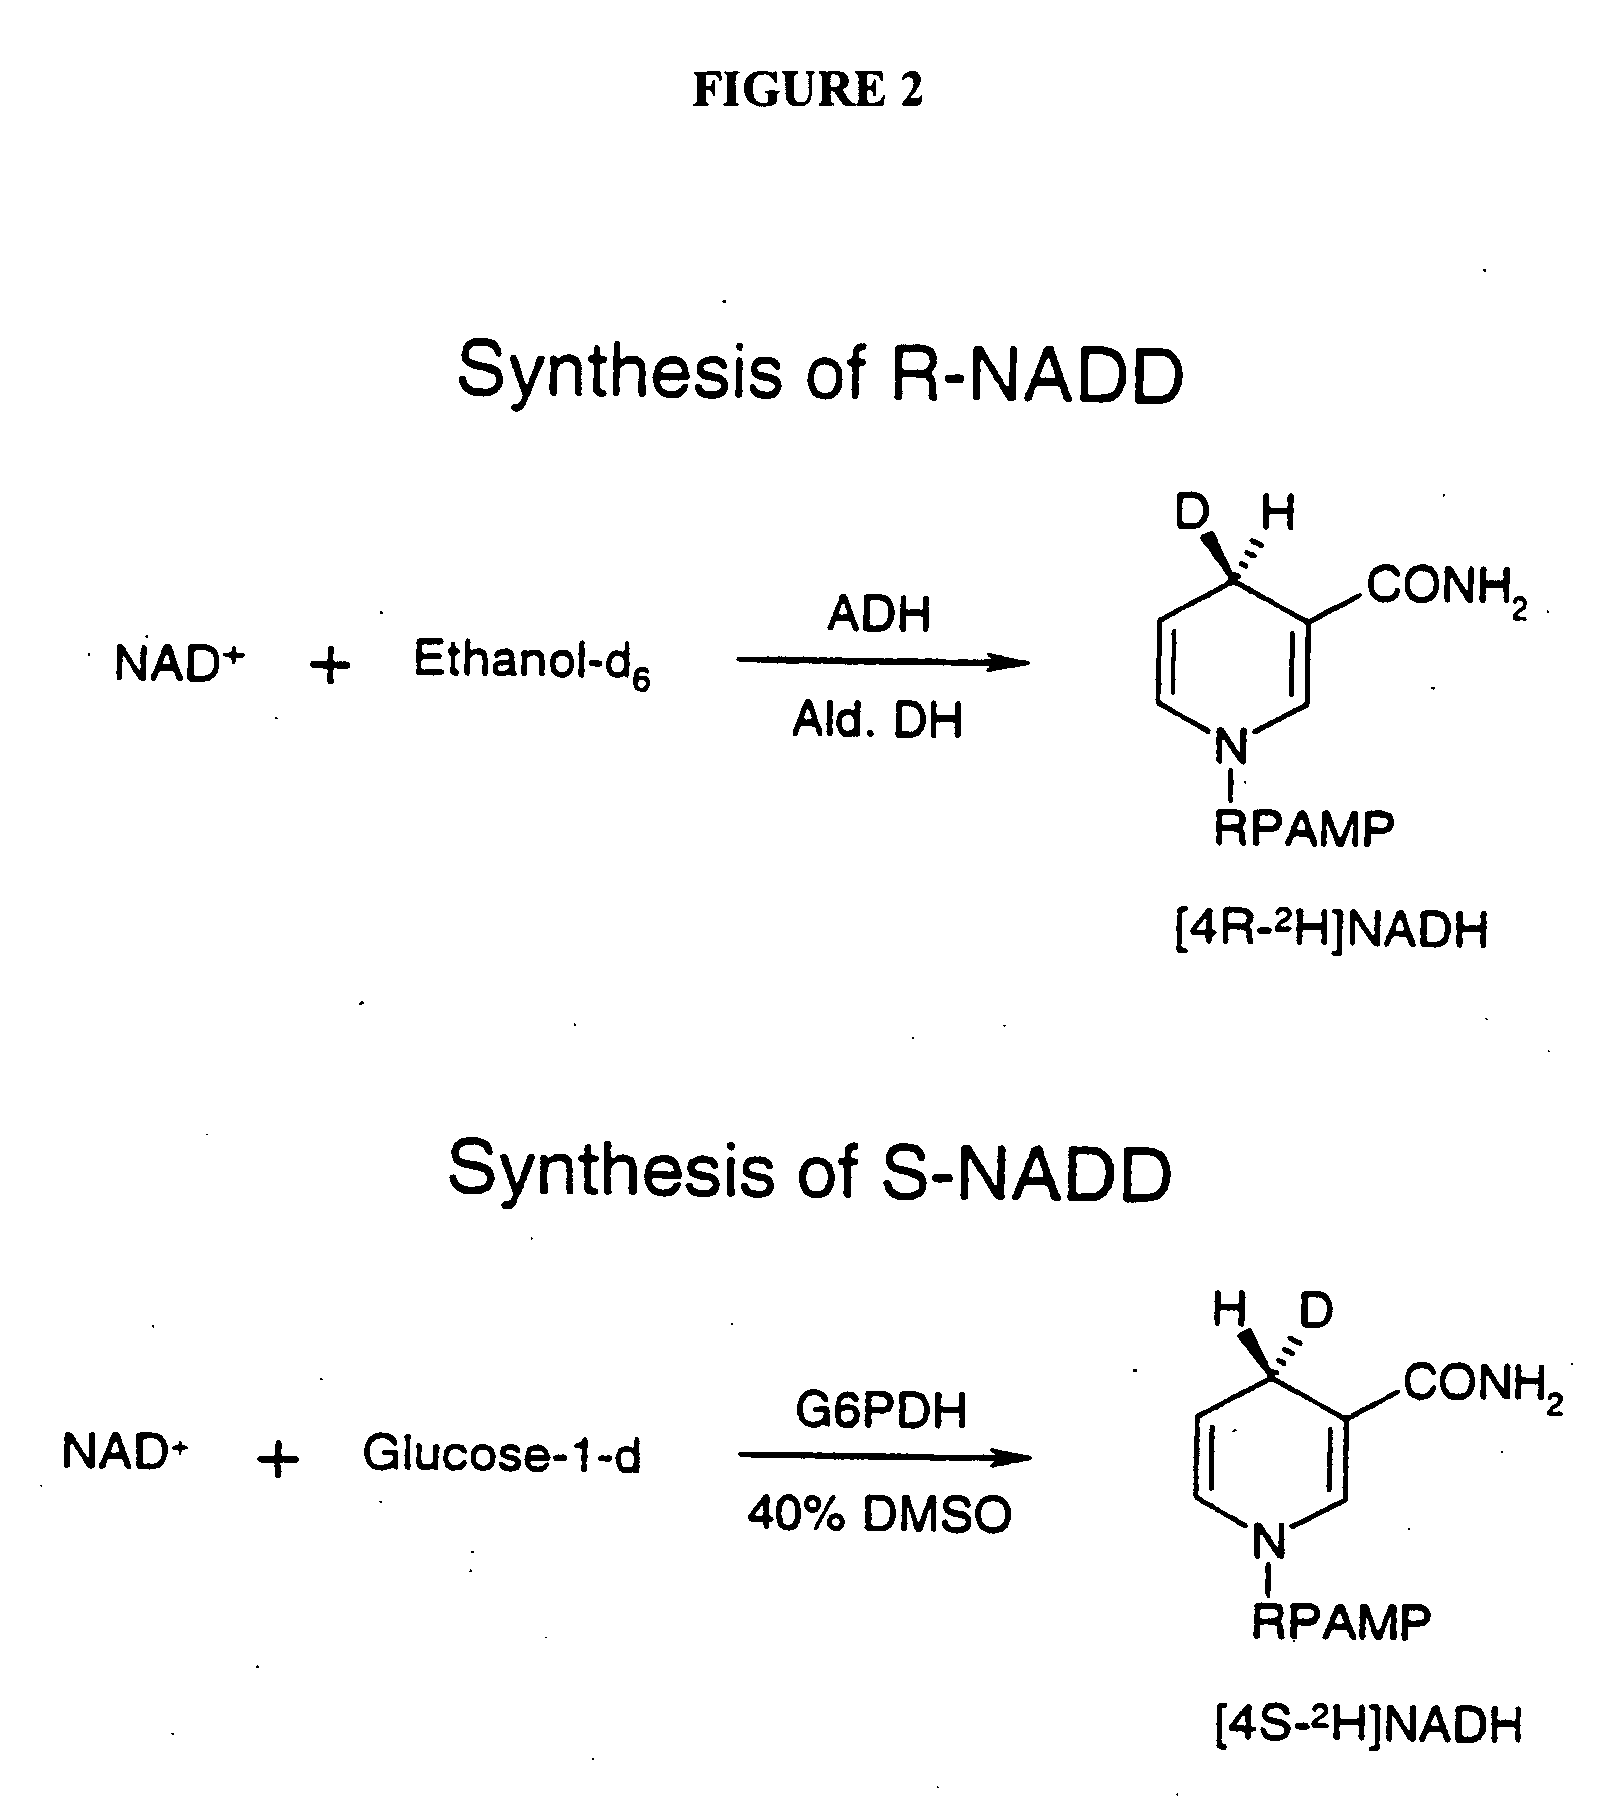 Methods of using Fab I and compounds modulating Fab I activity